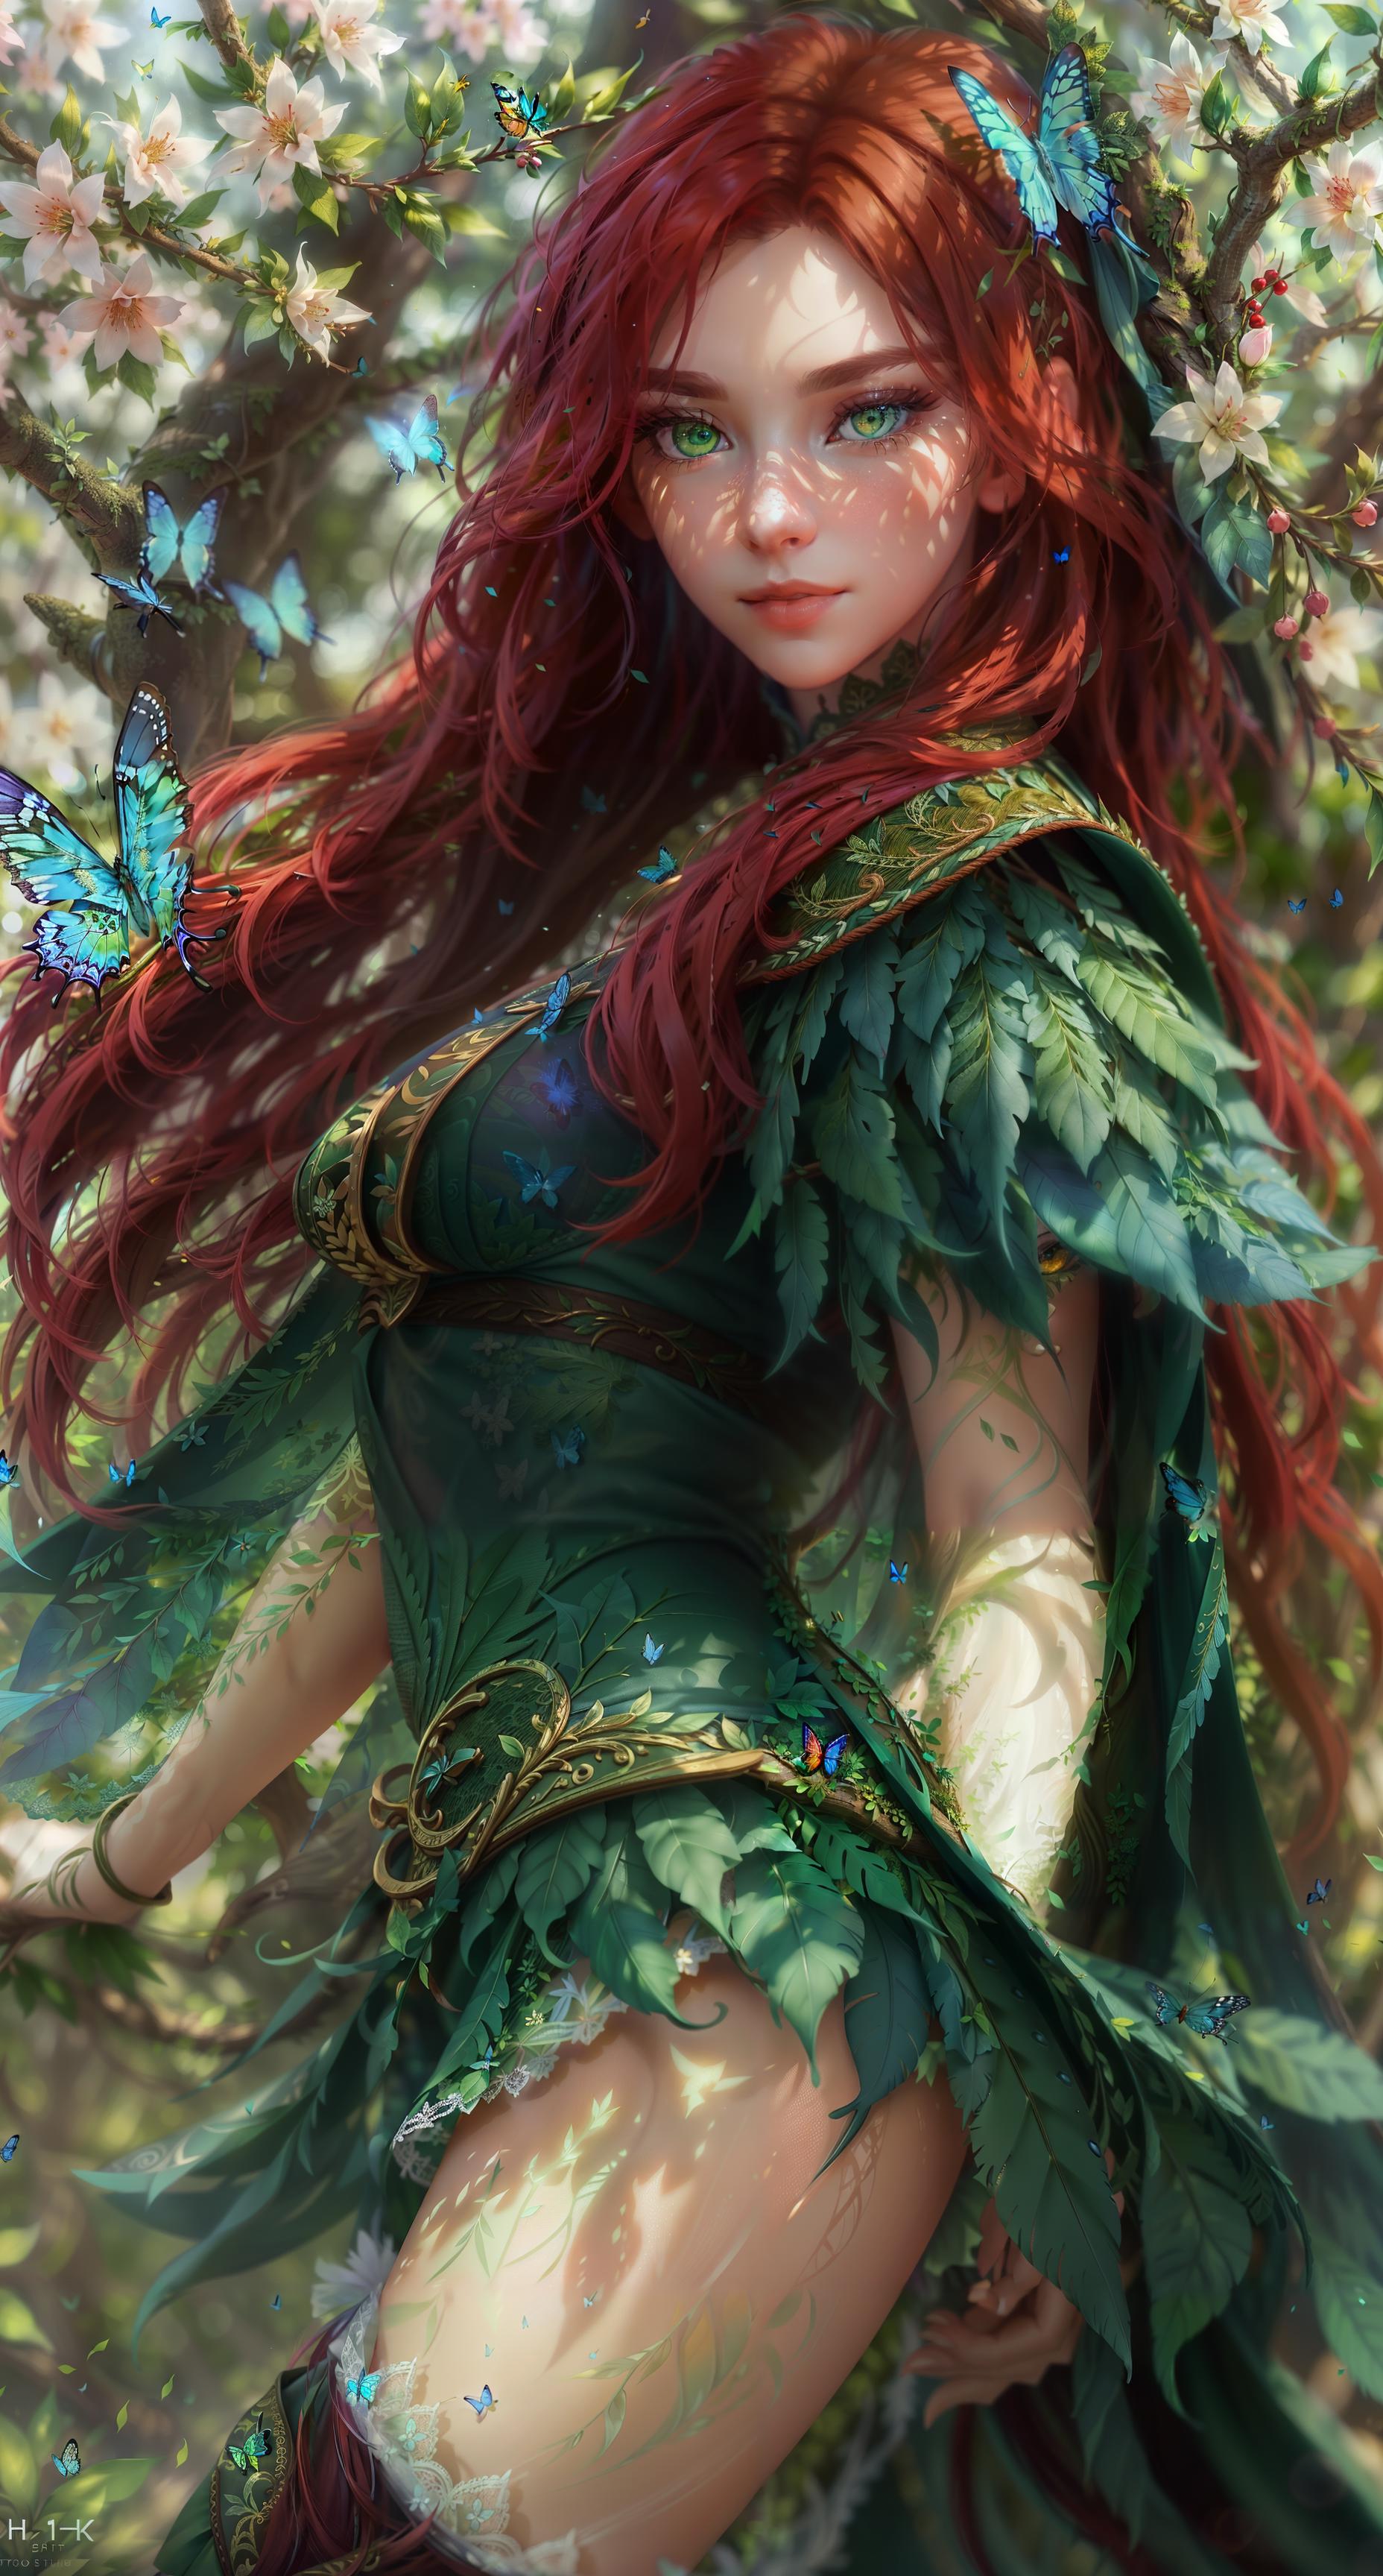 A woman in a green dress with red hair and green leaves on her shoulders.